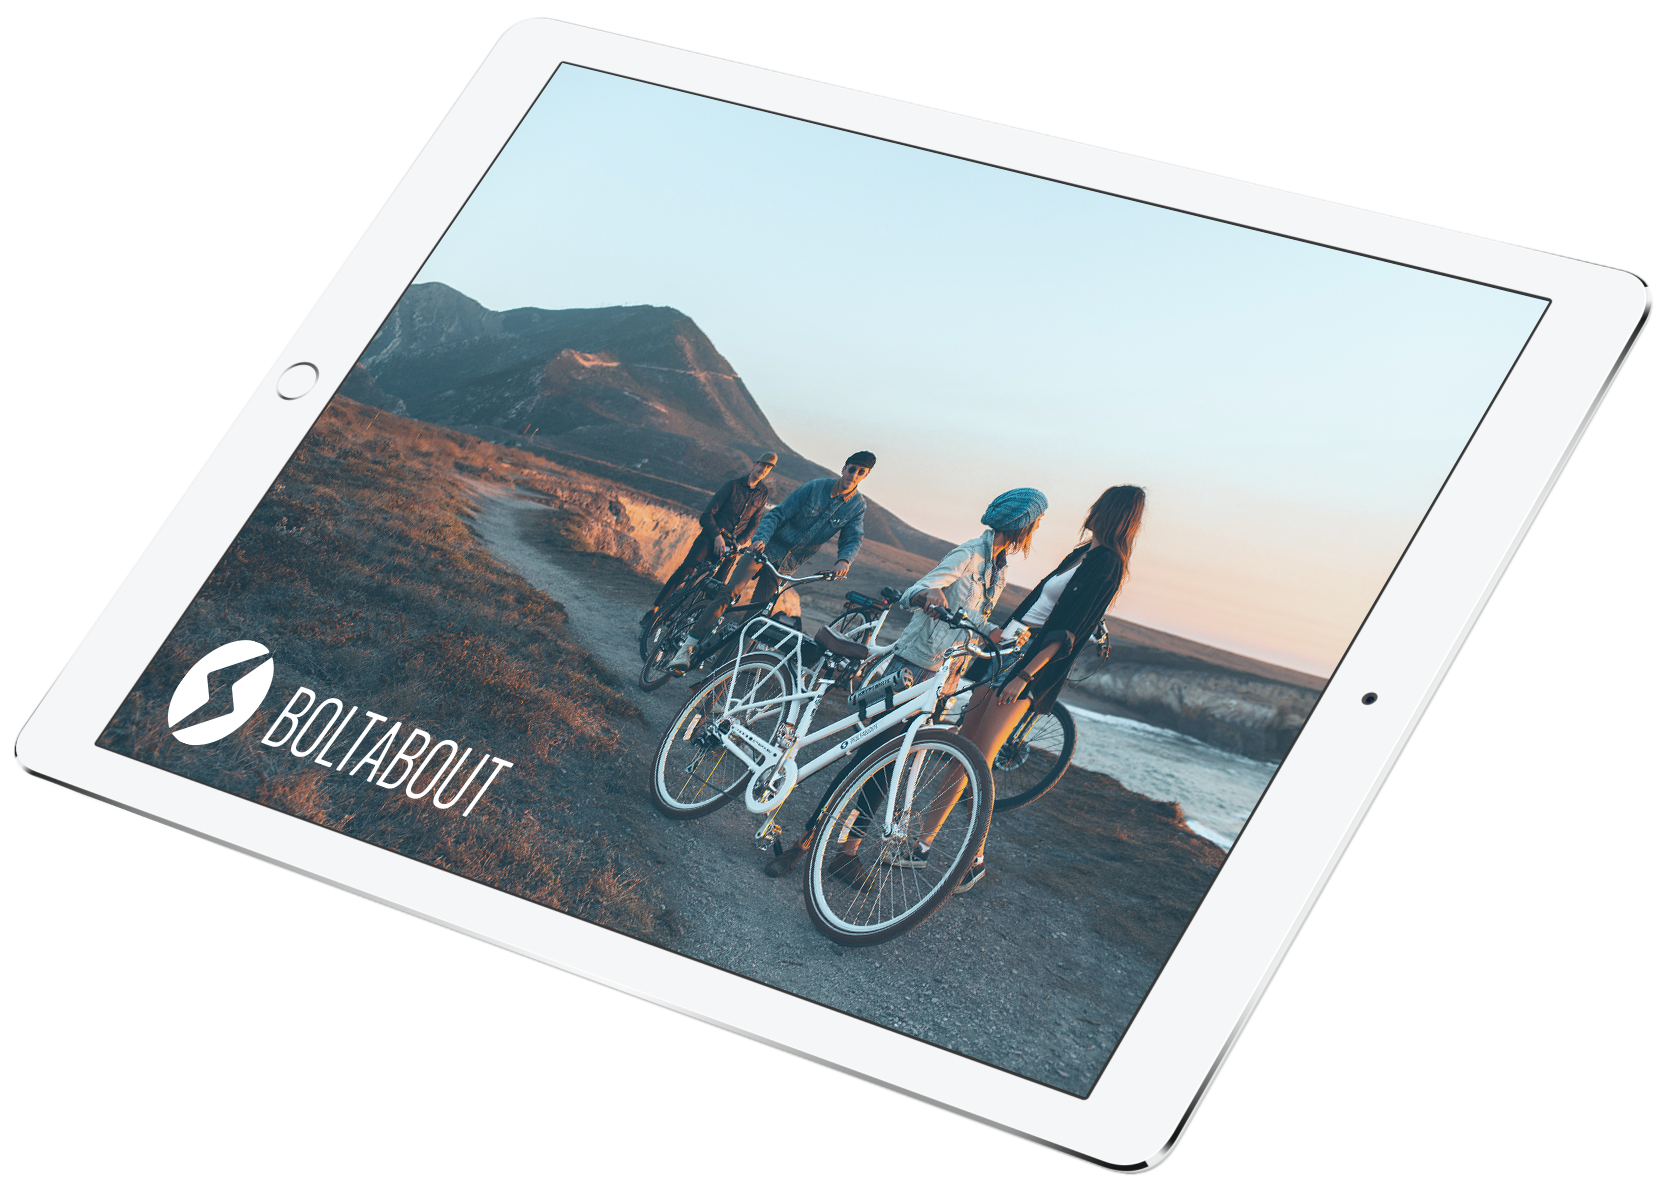 iPad displaying people on BoltAbout bikes, with the BoltAbout logo in the corner.